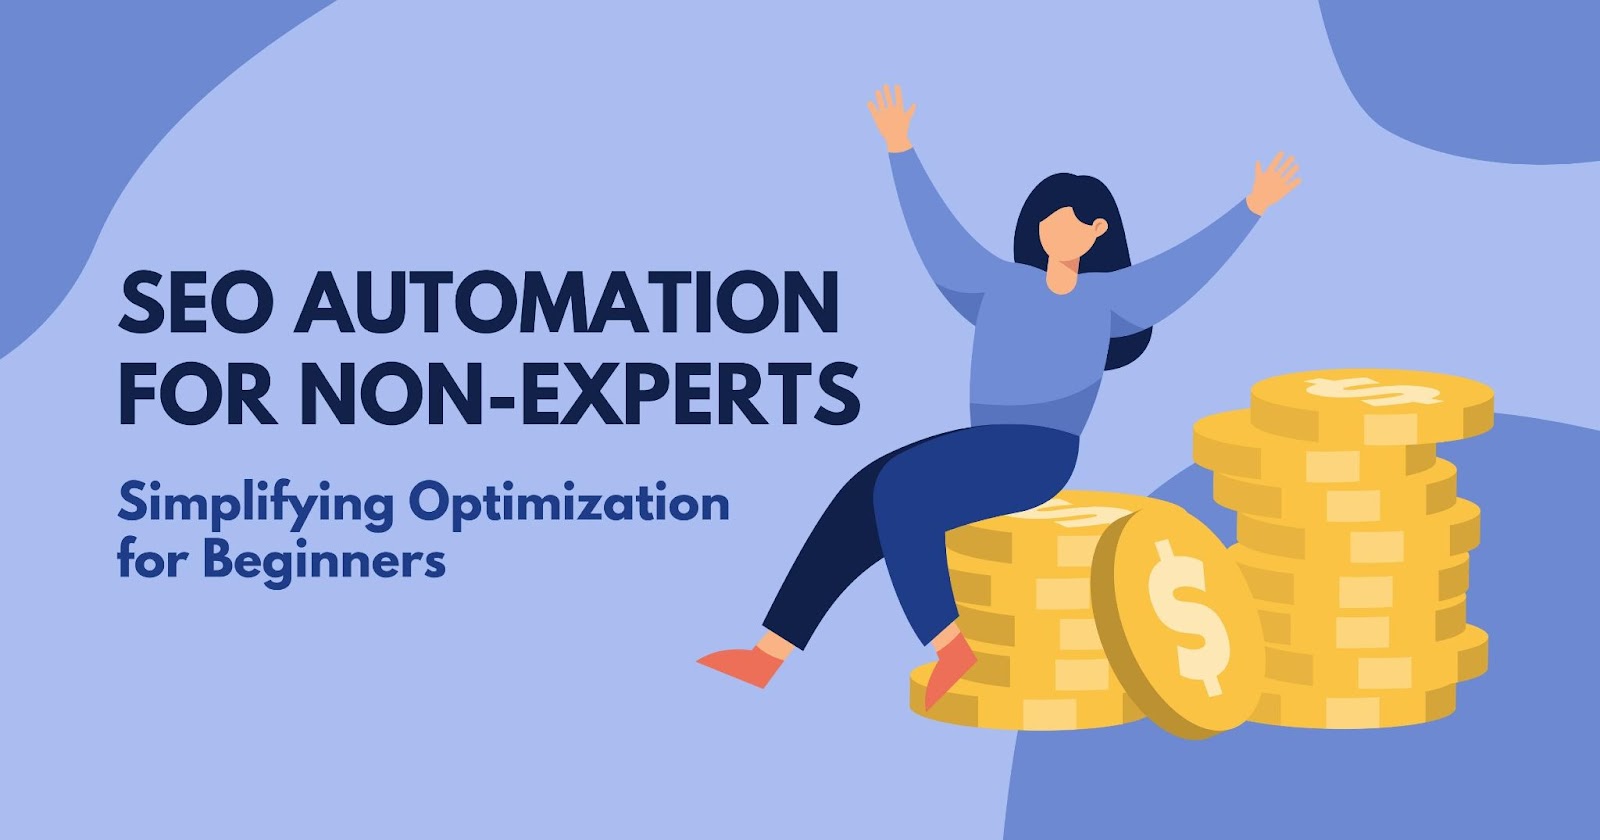 SEO Automation for Non-Experts: Simplifying Optimization for Beginners